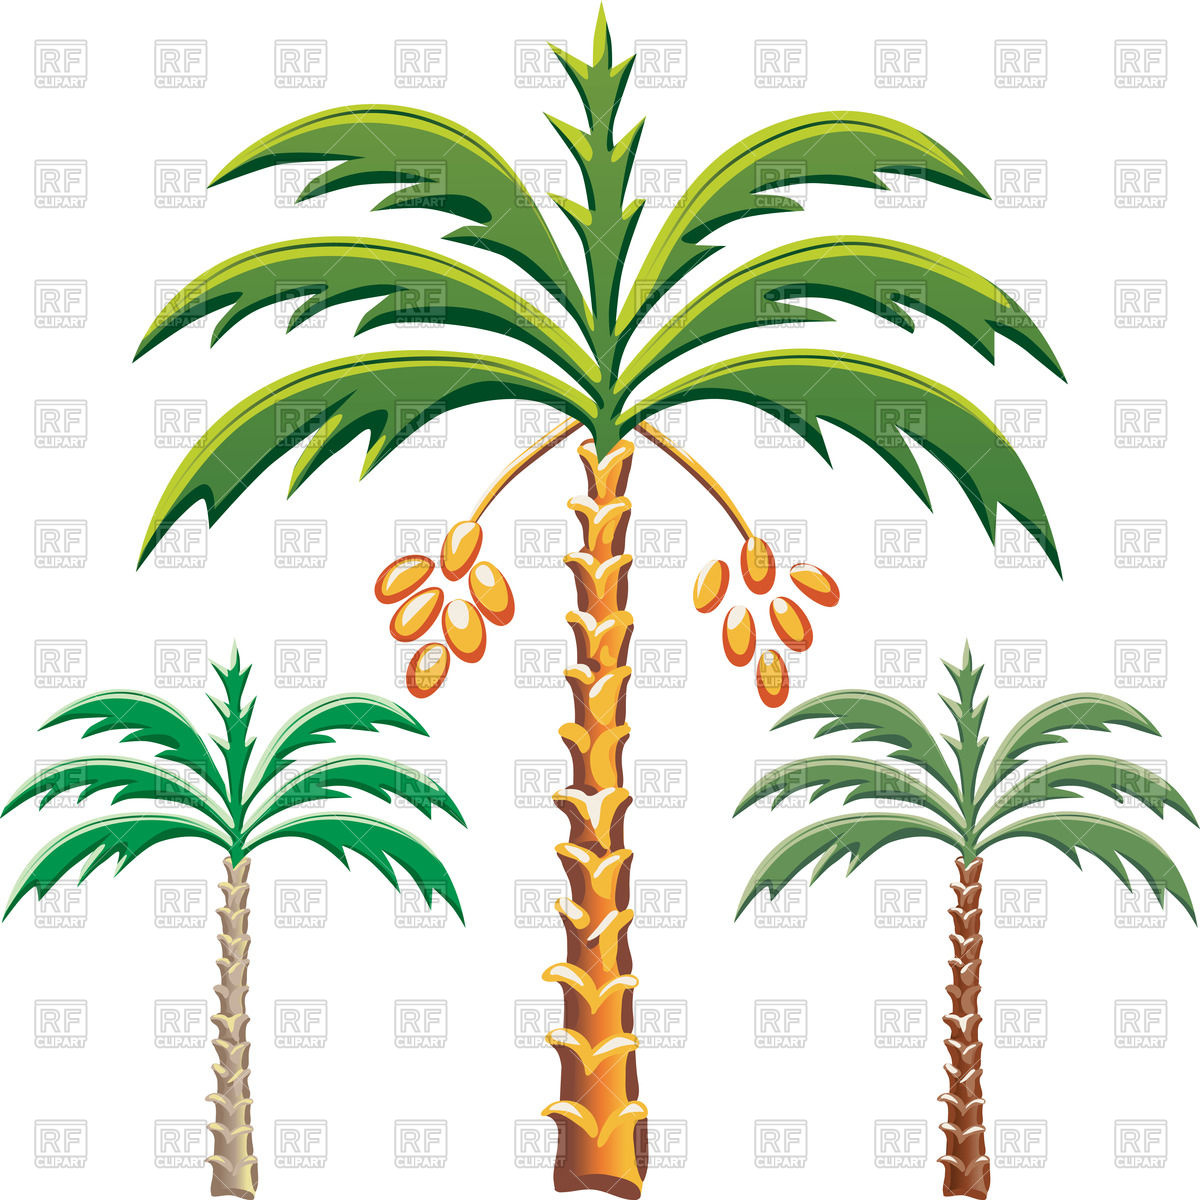 Date palm trees Vector Image u2013 Vector Illustration of Plants and Animals ©  volhakavalenkava #45315 Click to Zoom